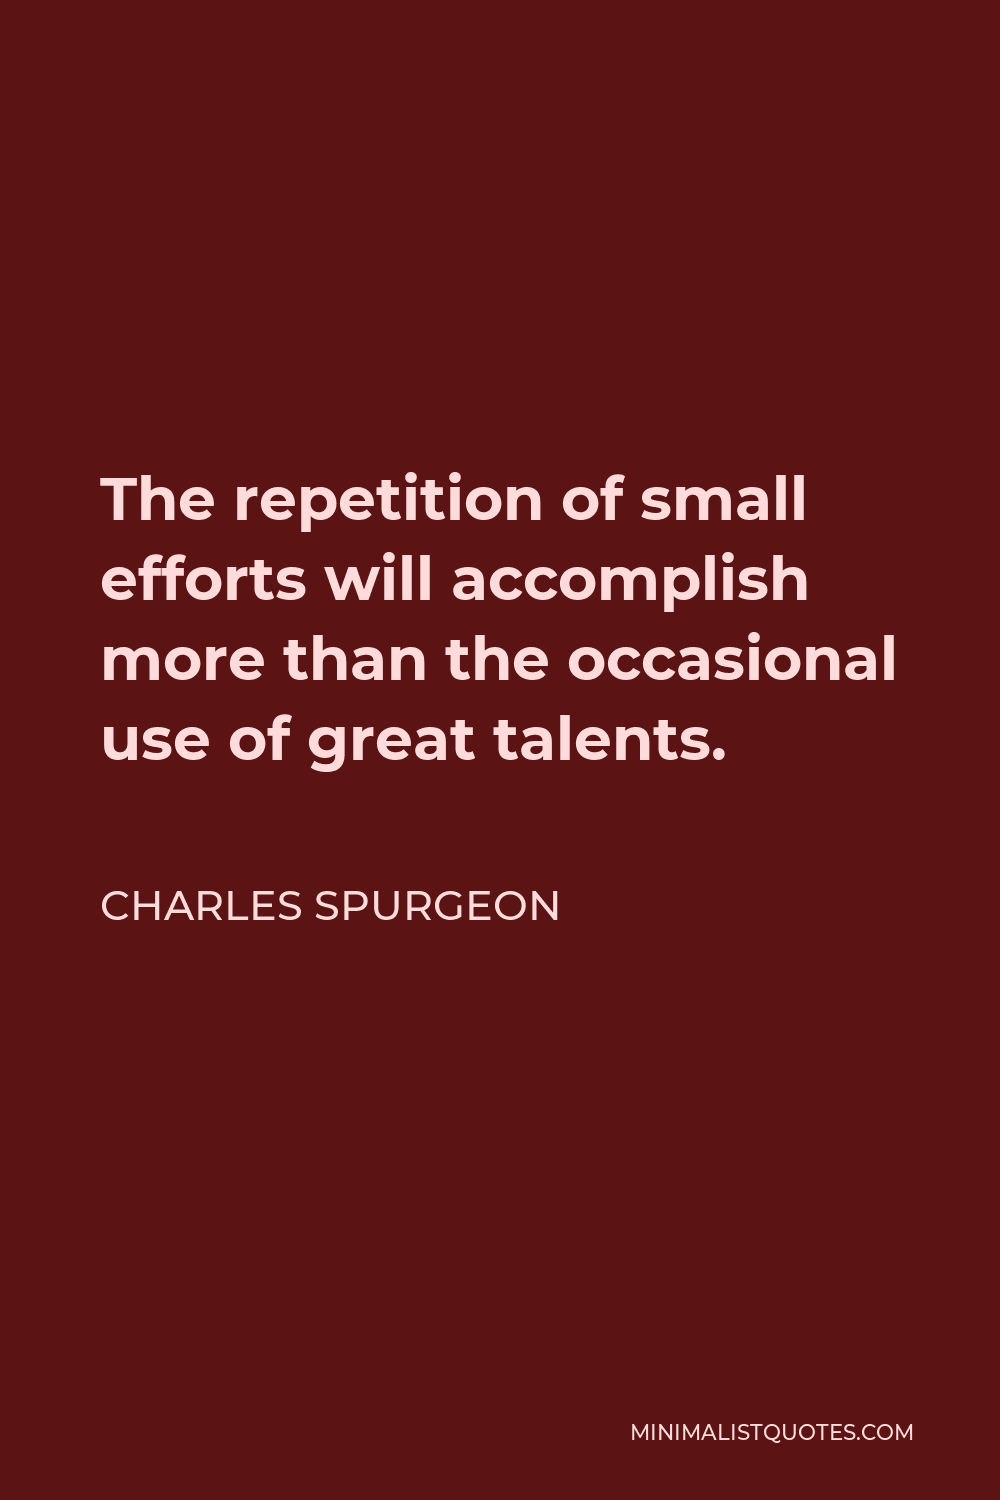 Charles Spurgeon Quote - The repetition of small efforts will accomplish more than the occasional use of great talents.